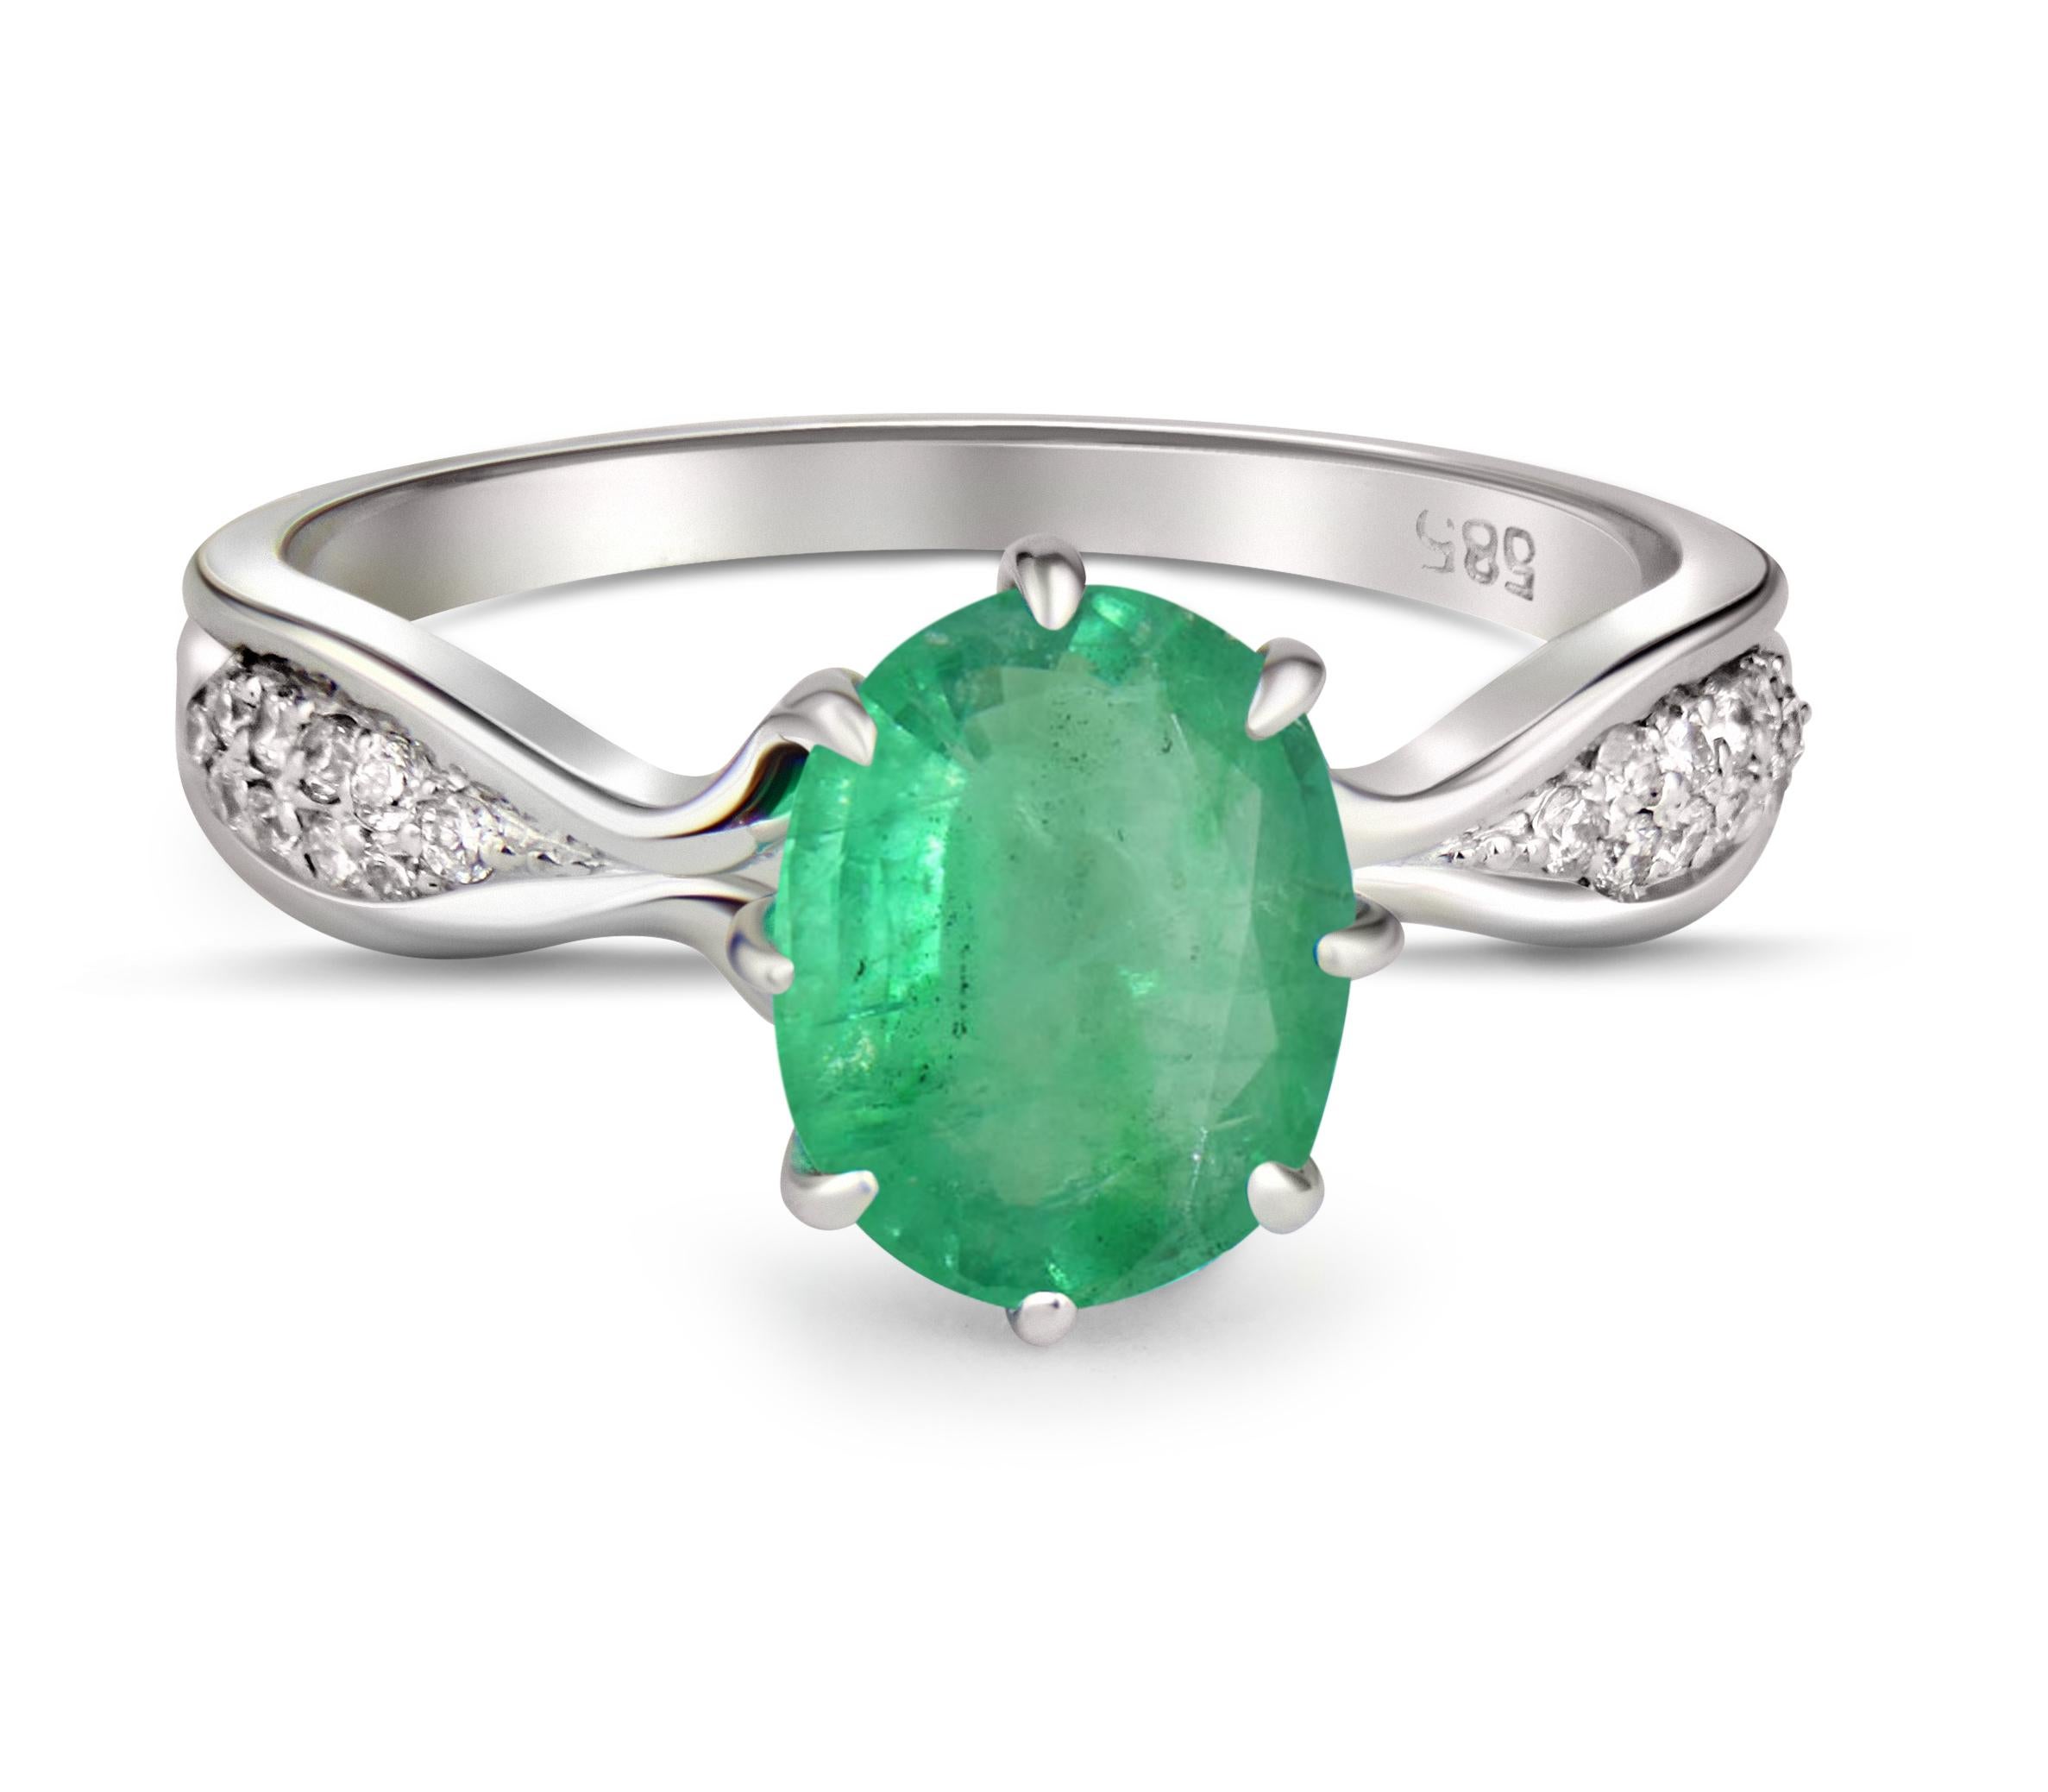 Emerald 14k gold ring. Oval Emerald ring. Emerald gold ring. Emerald vintage ring. Emerald engagement ring. May birthstone ring. Green gem ring. Emerald gold jewelry. Genuine emerald ring.
 
Metal: 14k solid gold
Weight: 2.1 g (depends from